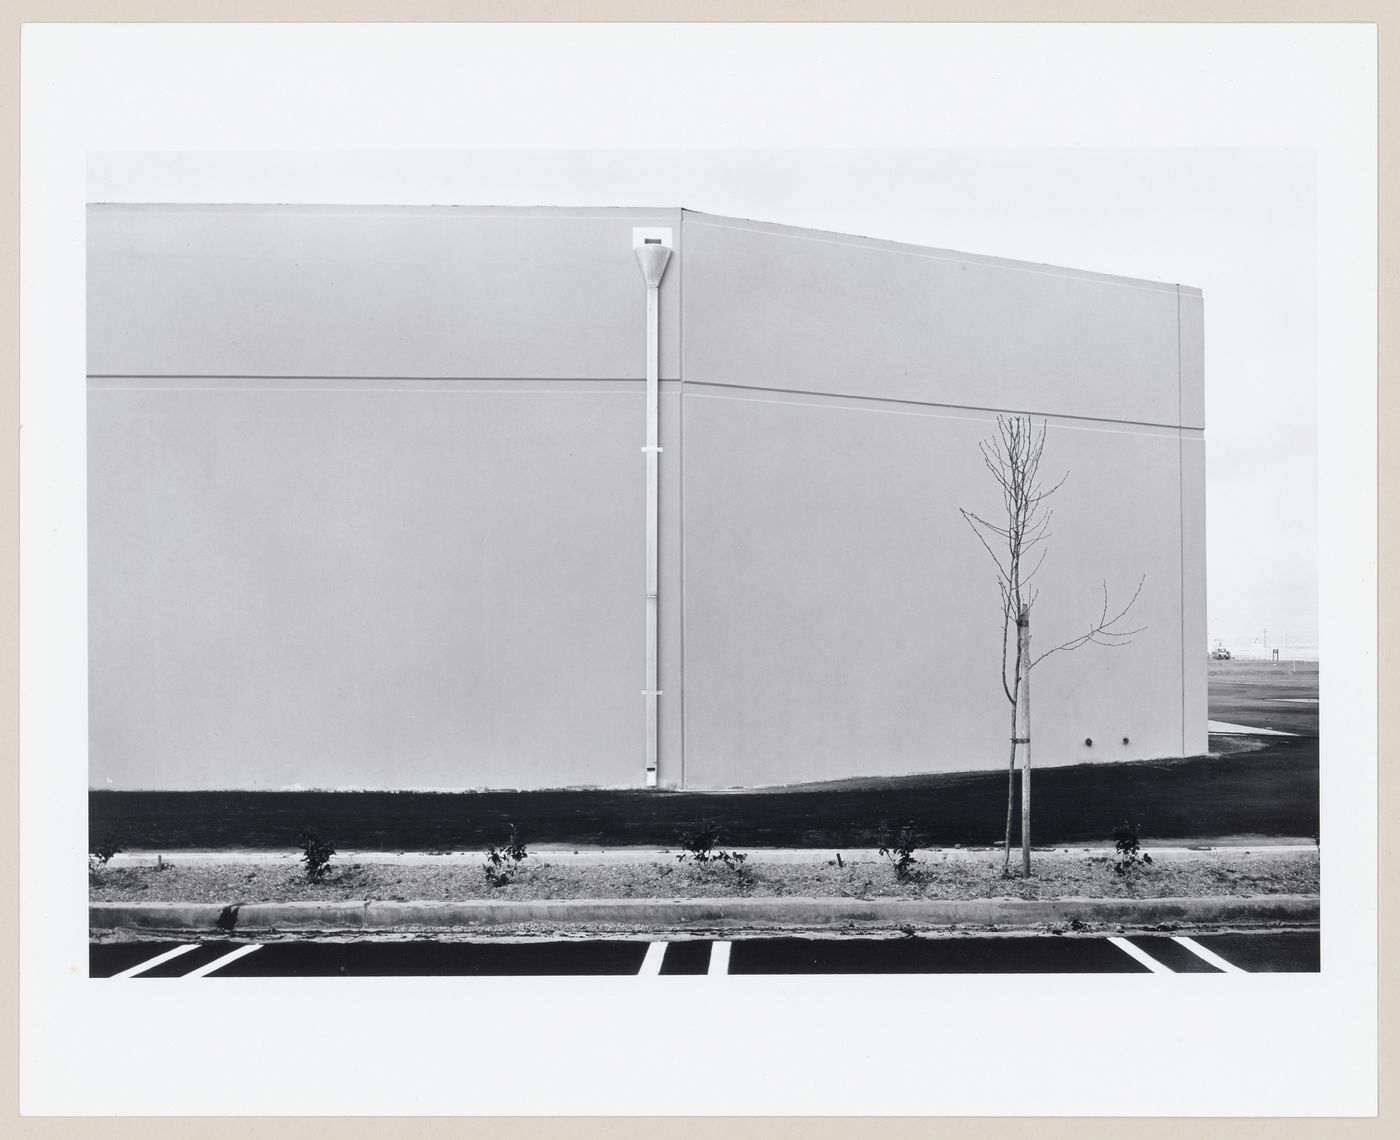 View of the south wall of an unoccupied industrial structure, 16812 Milliken, Irvine, California, United States, from the series “The new Industrial Parks near Irvine, California”